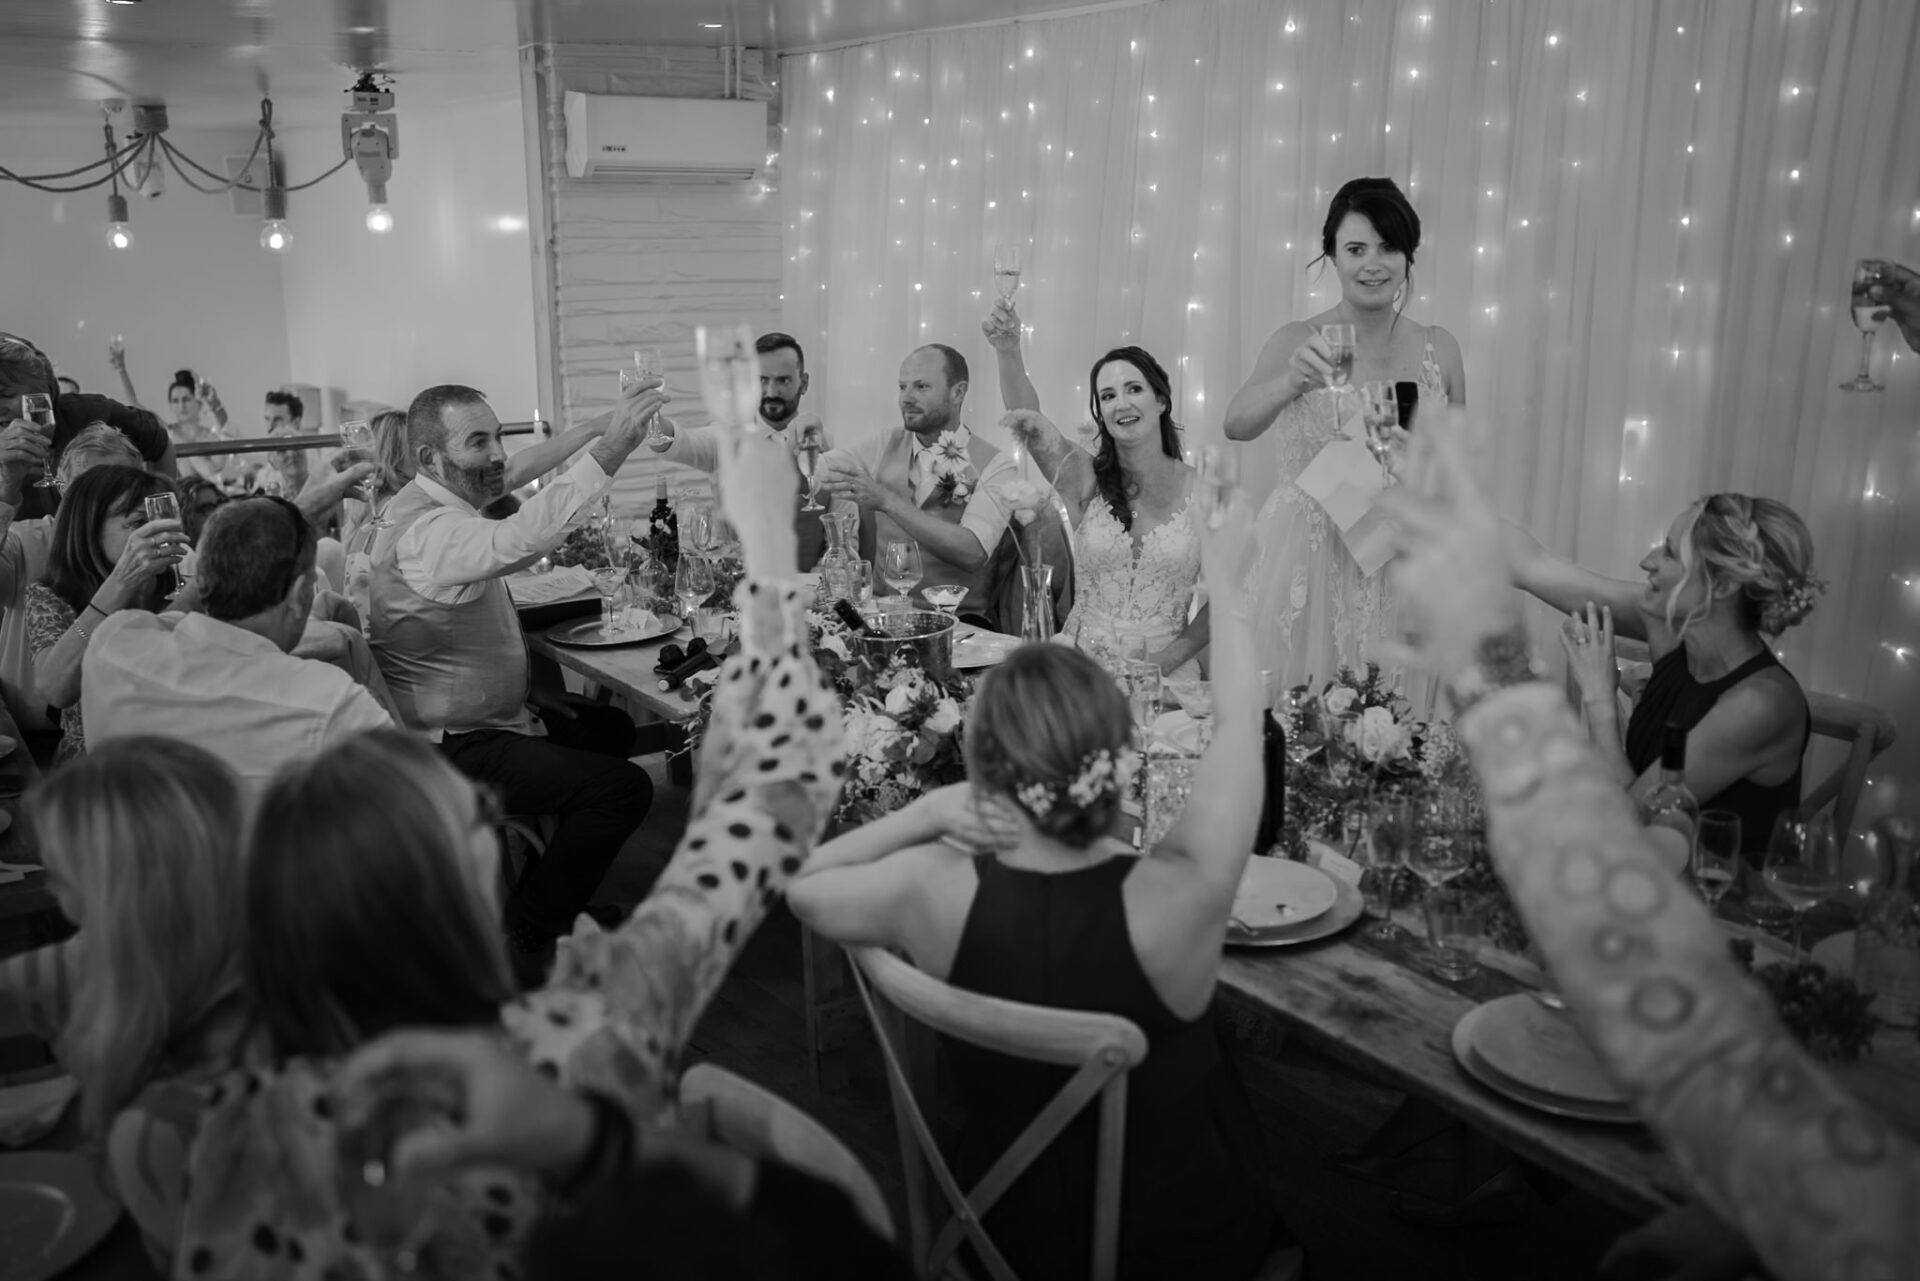 Guests at a wedding reception raising their glasses for a toast, with a joyful bride and groom at the center, surrounded by string lights and floral decorations during a photography session.